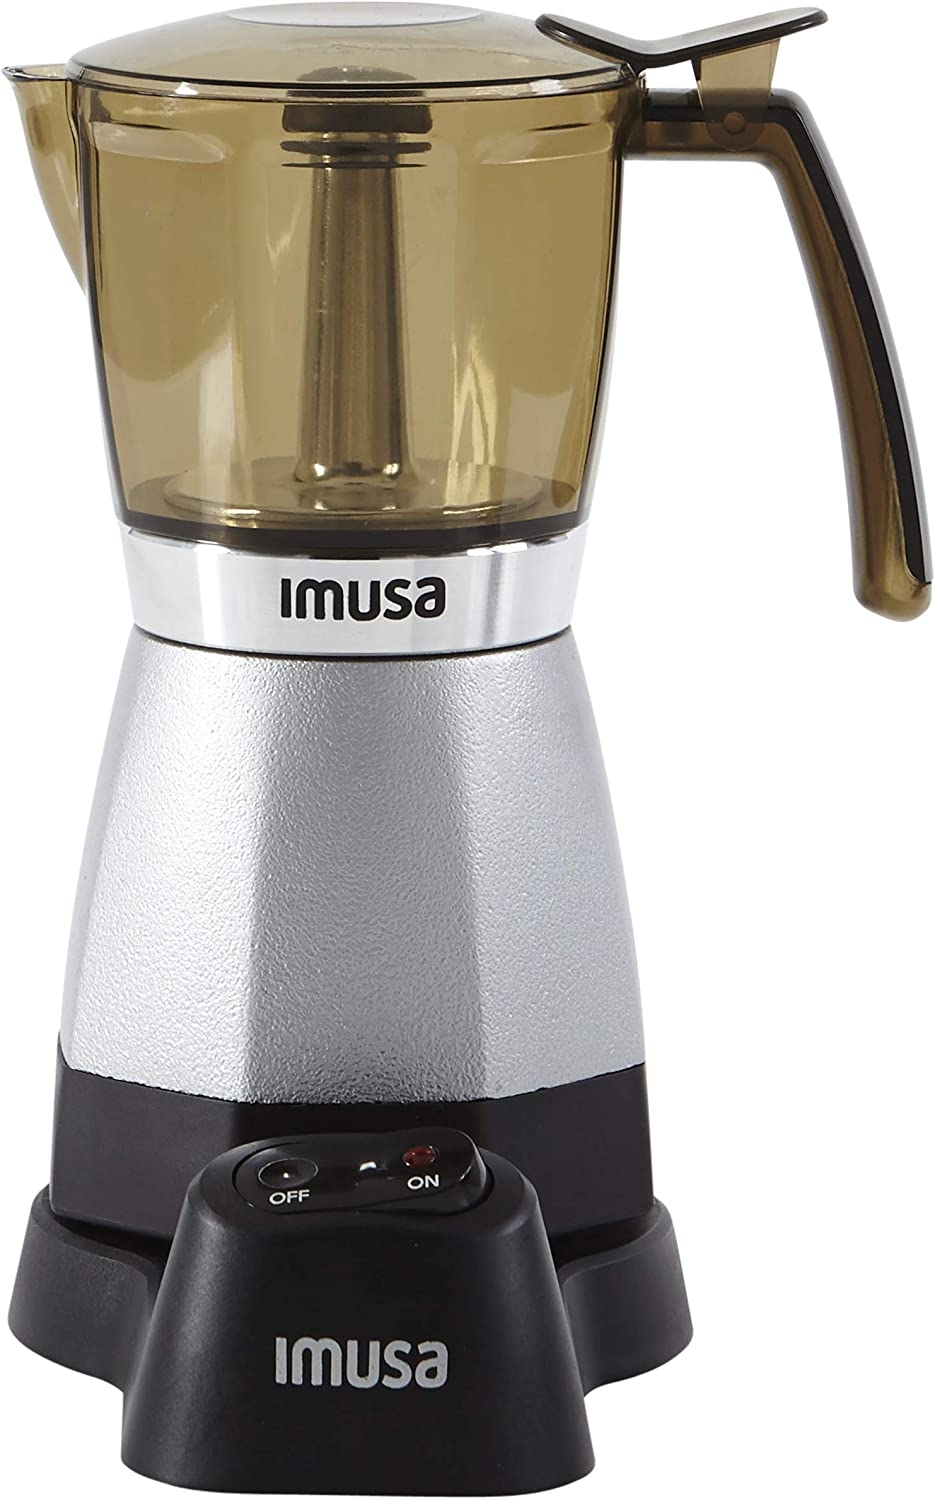 IMUSA USA Electric Espresso/Moka Maker, 3-6 Cups, Red Import To Shop ×Product customization General Description Gallery Reviews